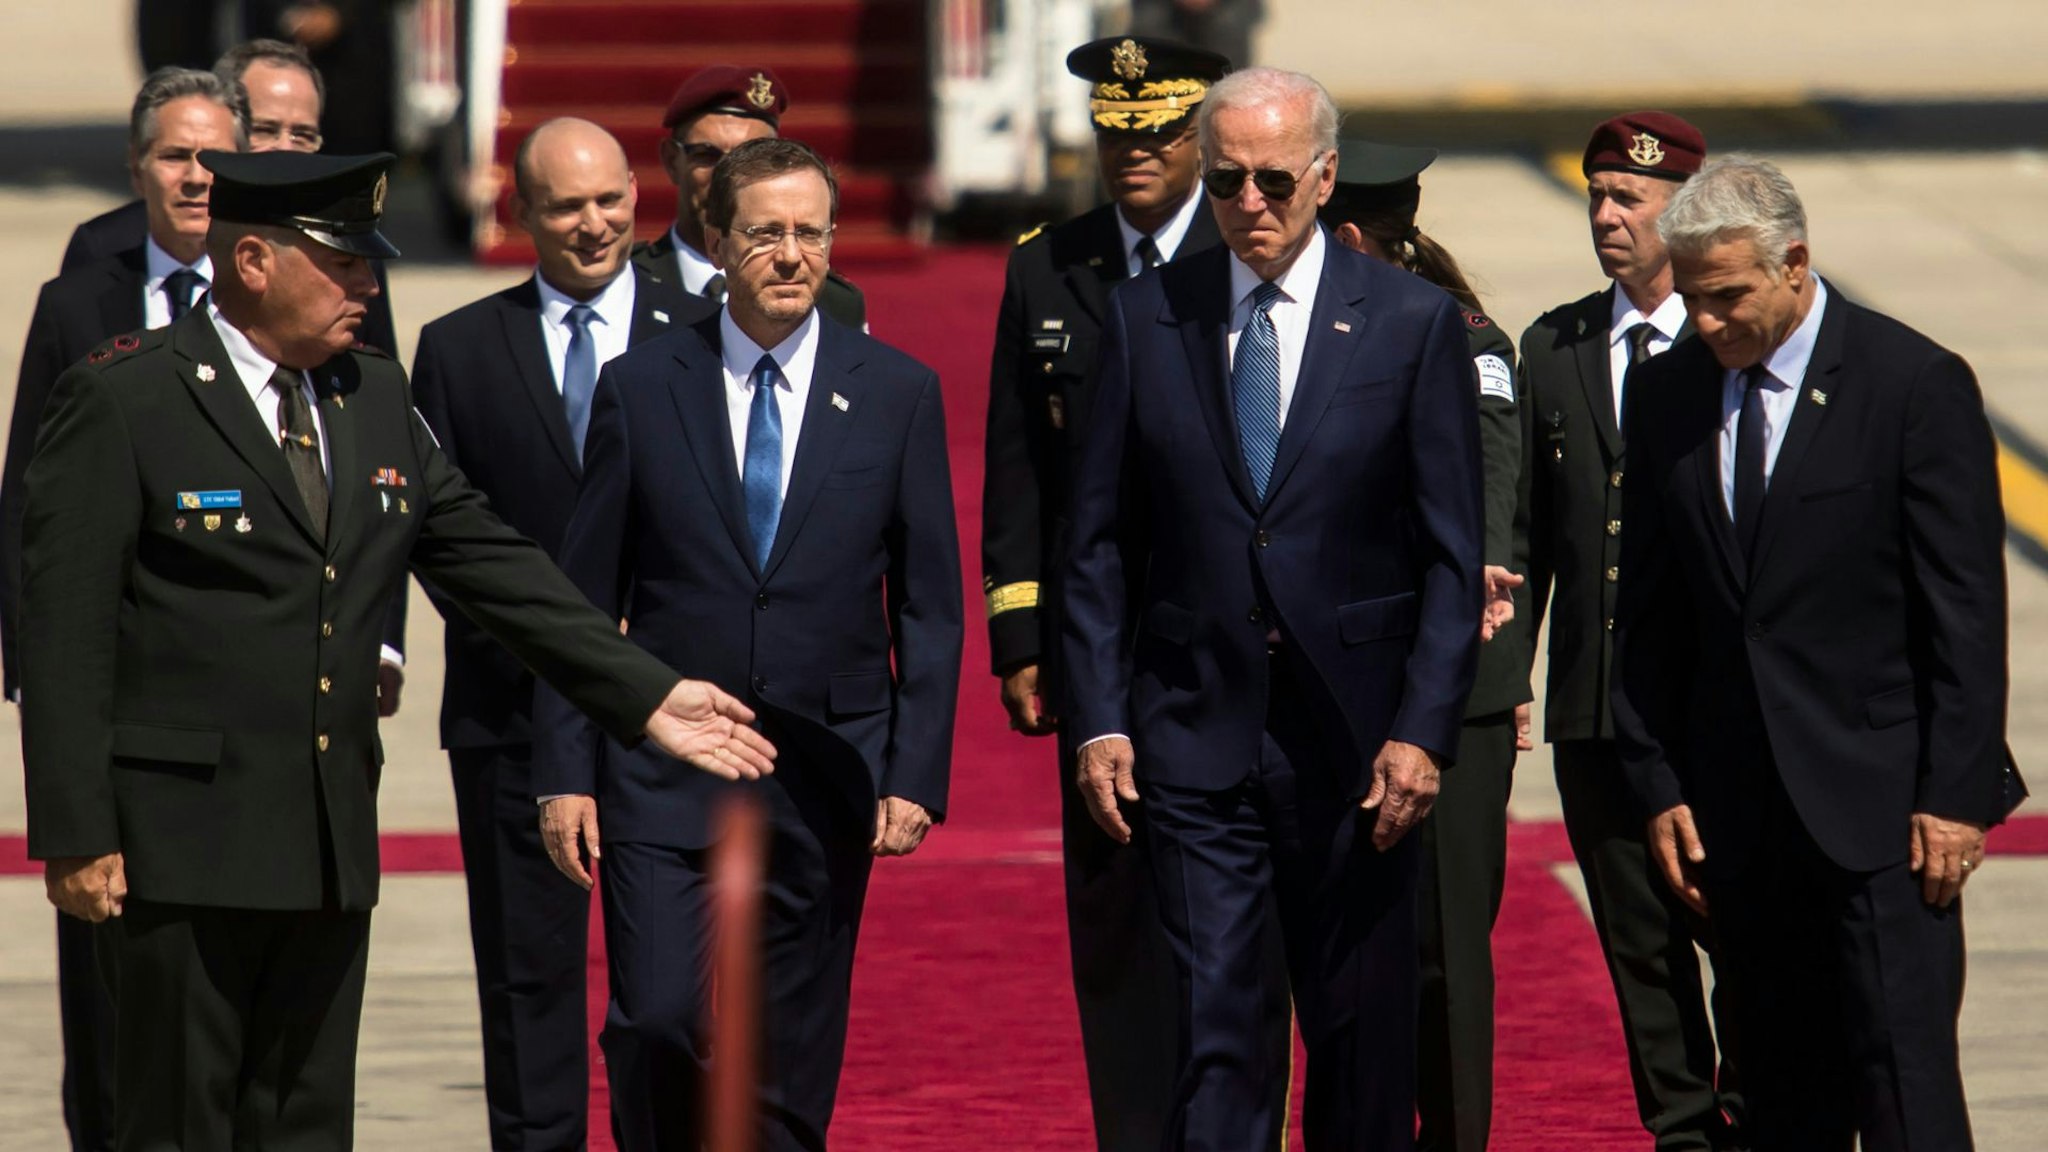 LOD, ISRAEL - JULY 13: U.S. President Joe Biden is welcomed by Israeli Prime Minister Yair Lapid and Israeli President Isaac Herzog during an arrival ceremony at Ben Gurion Airport on July 13, 2022 in Lod, Israel.